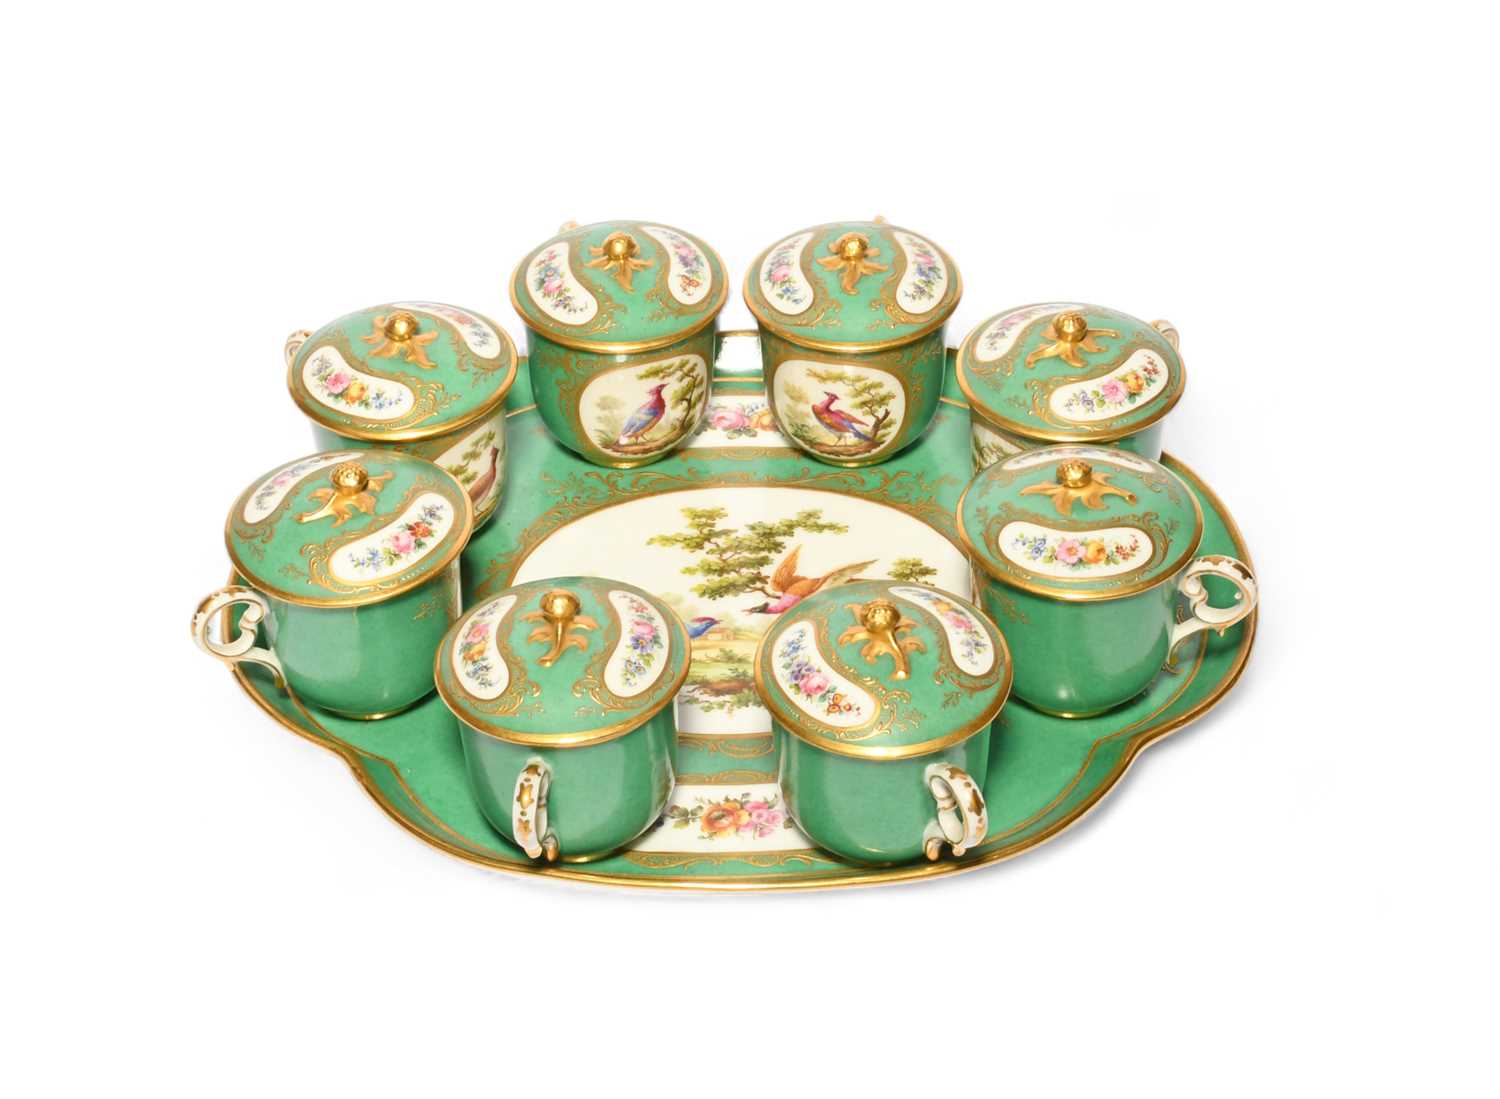 A Continental porcelain set of eight custard cups and covers with stand, late 19th century, - Image 2 of 3